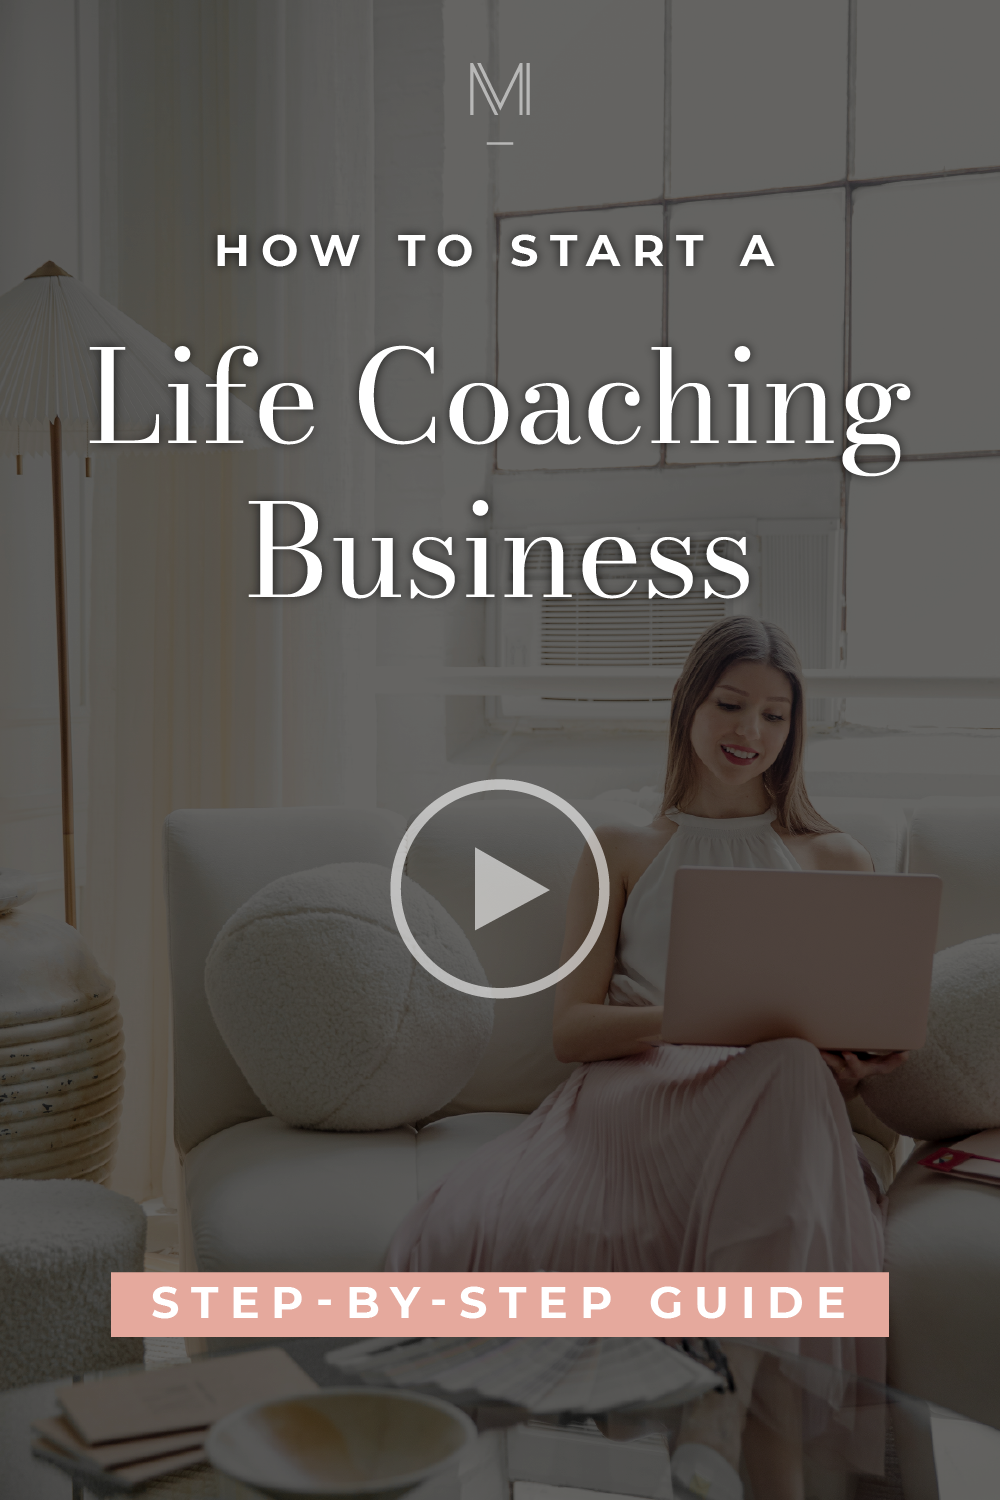 Wondering how to start a coaching business from scratch? Then this blog post is for you! I’m sharing 4 simple steps to start an online coaching business, including how to attract your ideal, high-paying clients. #luxurybrand #lifecoach #lifecoaching #onlinebusinesstips